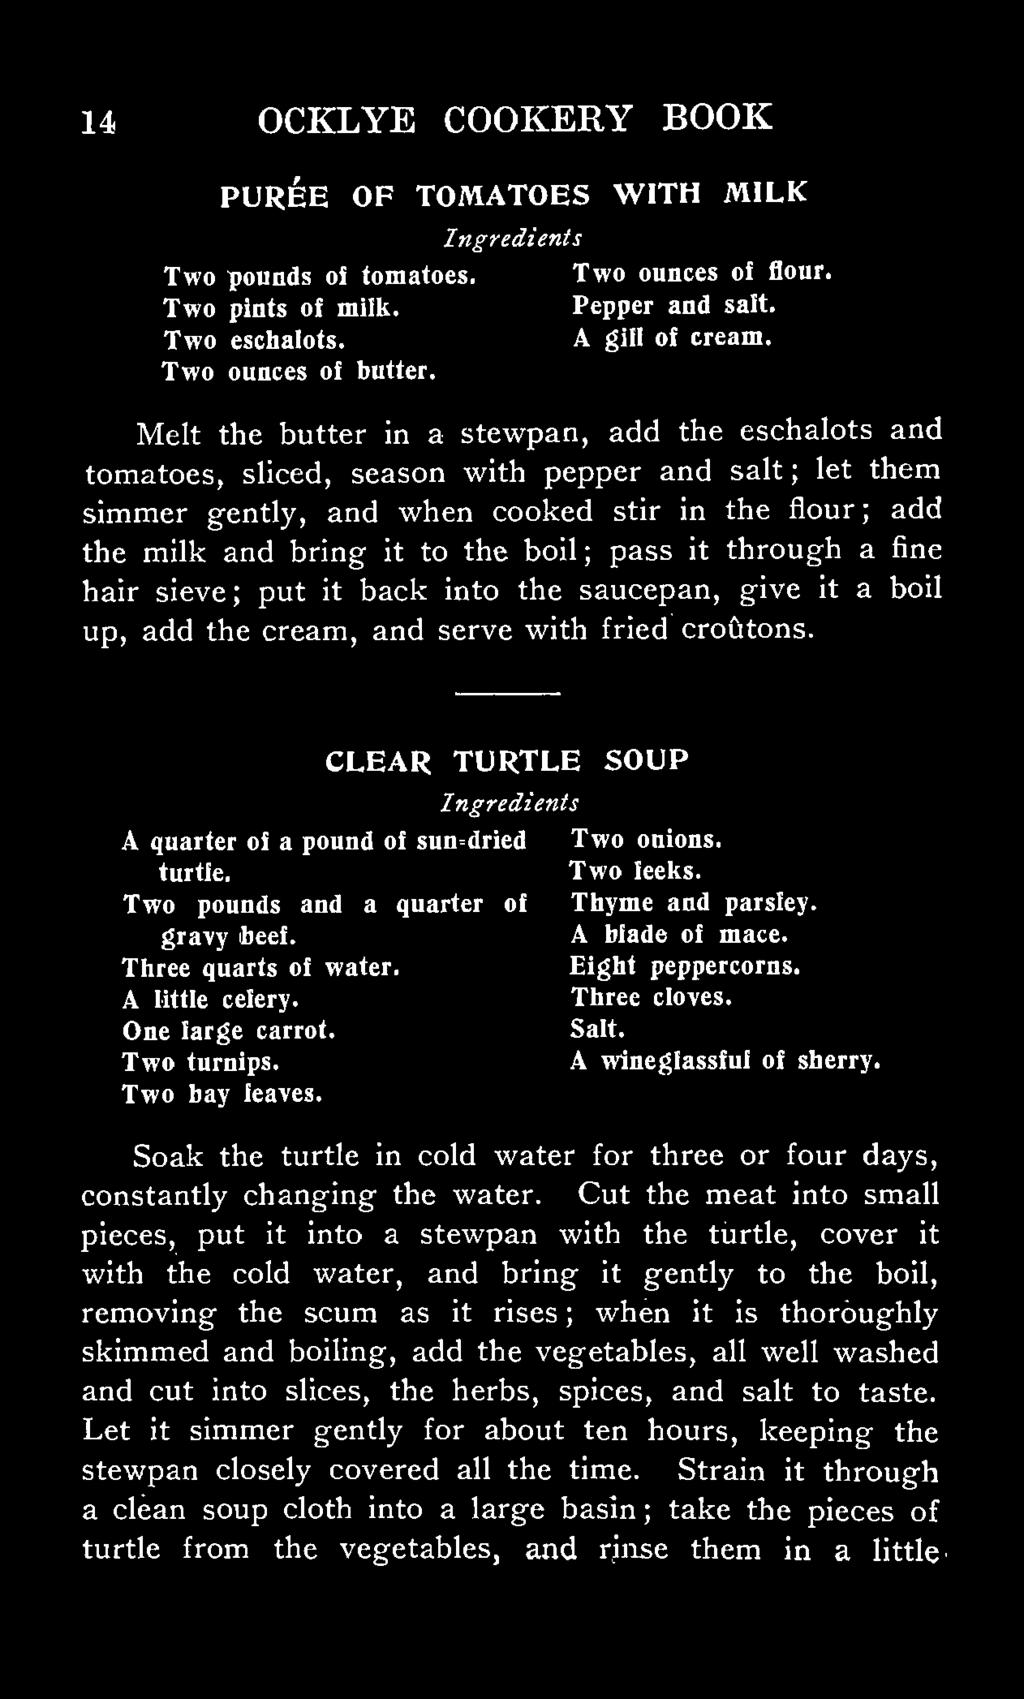 pass it through a fine hair sieve; put it back into the saucepan, give it a boll up, add the cream, and serve with fried croutons. CLEAR TURTLE SOUP A quarter of a pound of sun=dried Two onions.